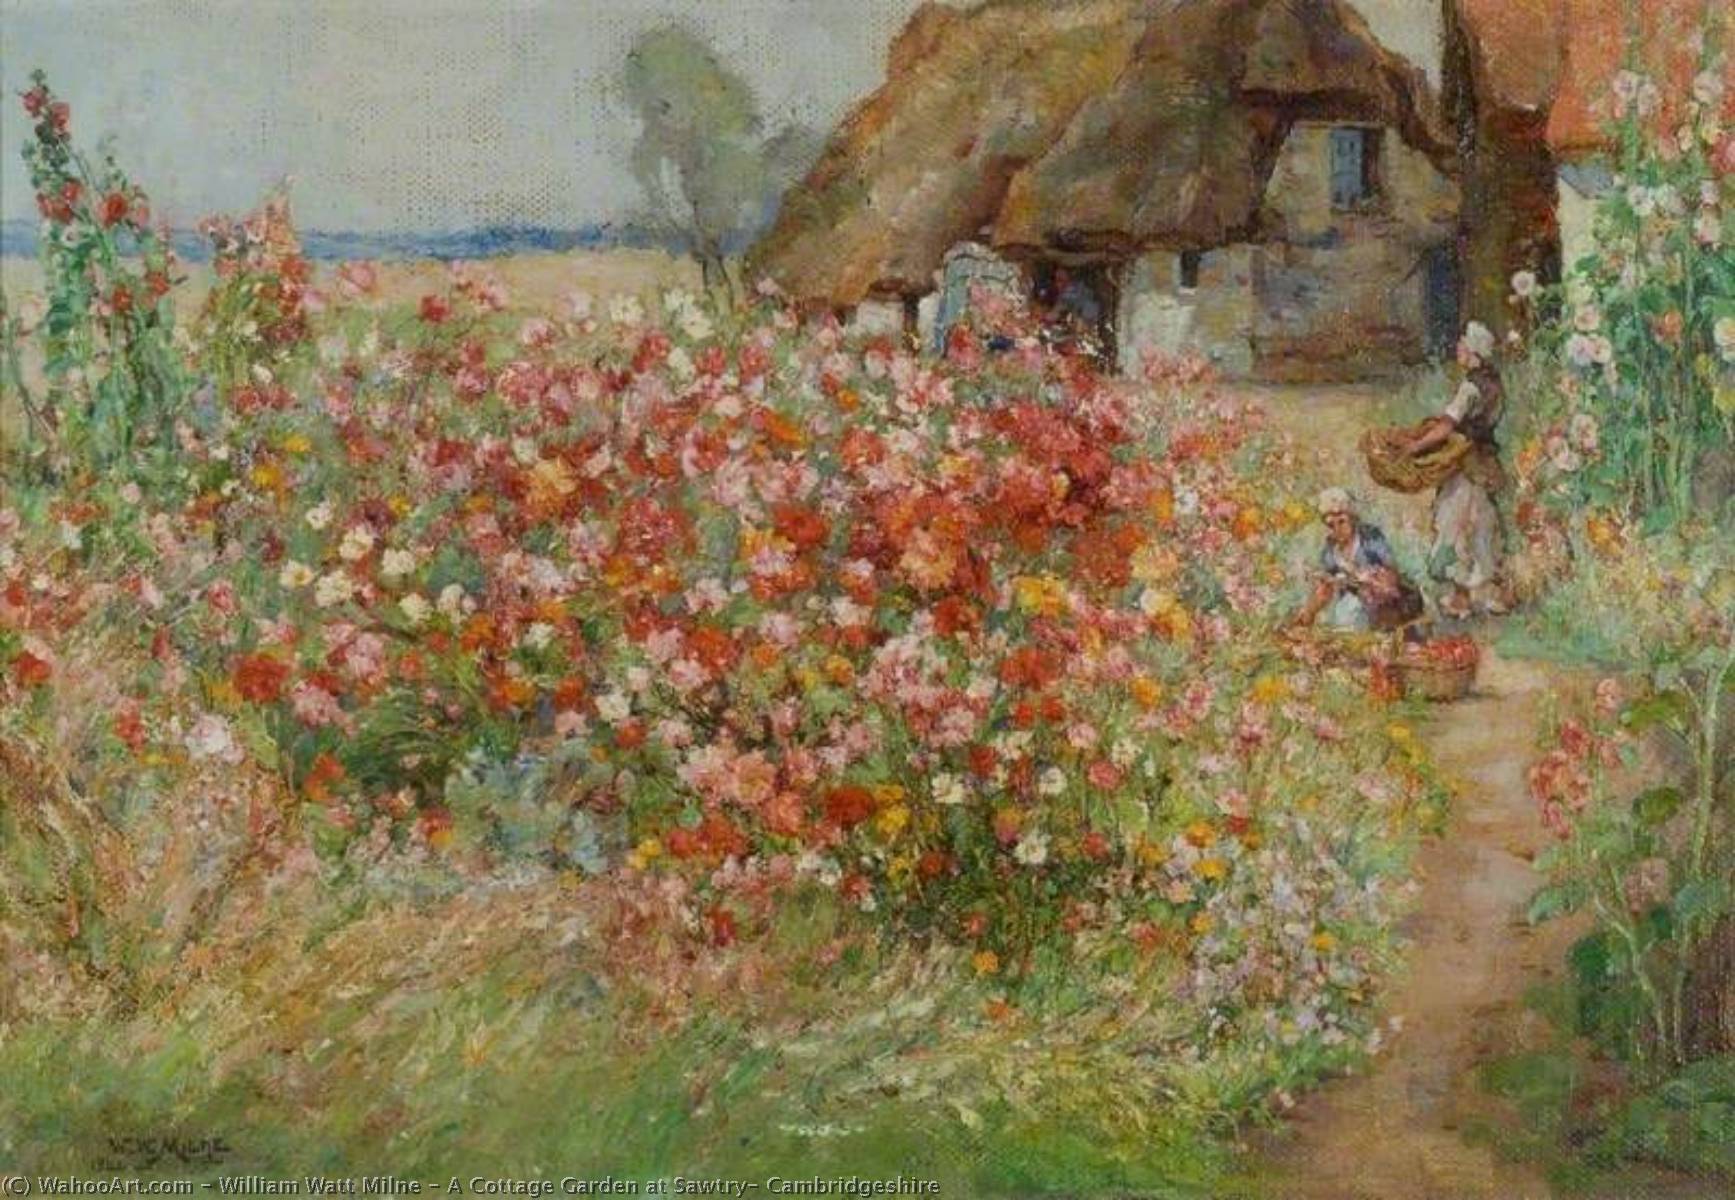 Order Paintings Reproductions A Cottage Garden at Sawtry, Cambridgeshire, 1944 by William Watt Milne (1865-1949) | ArtsDot.com